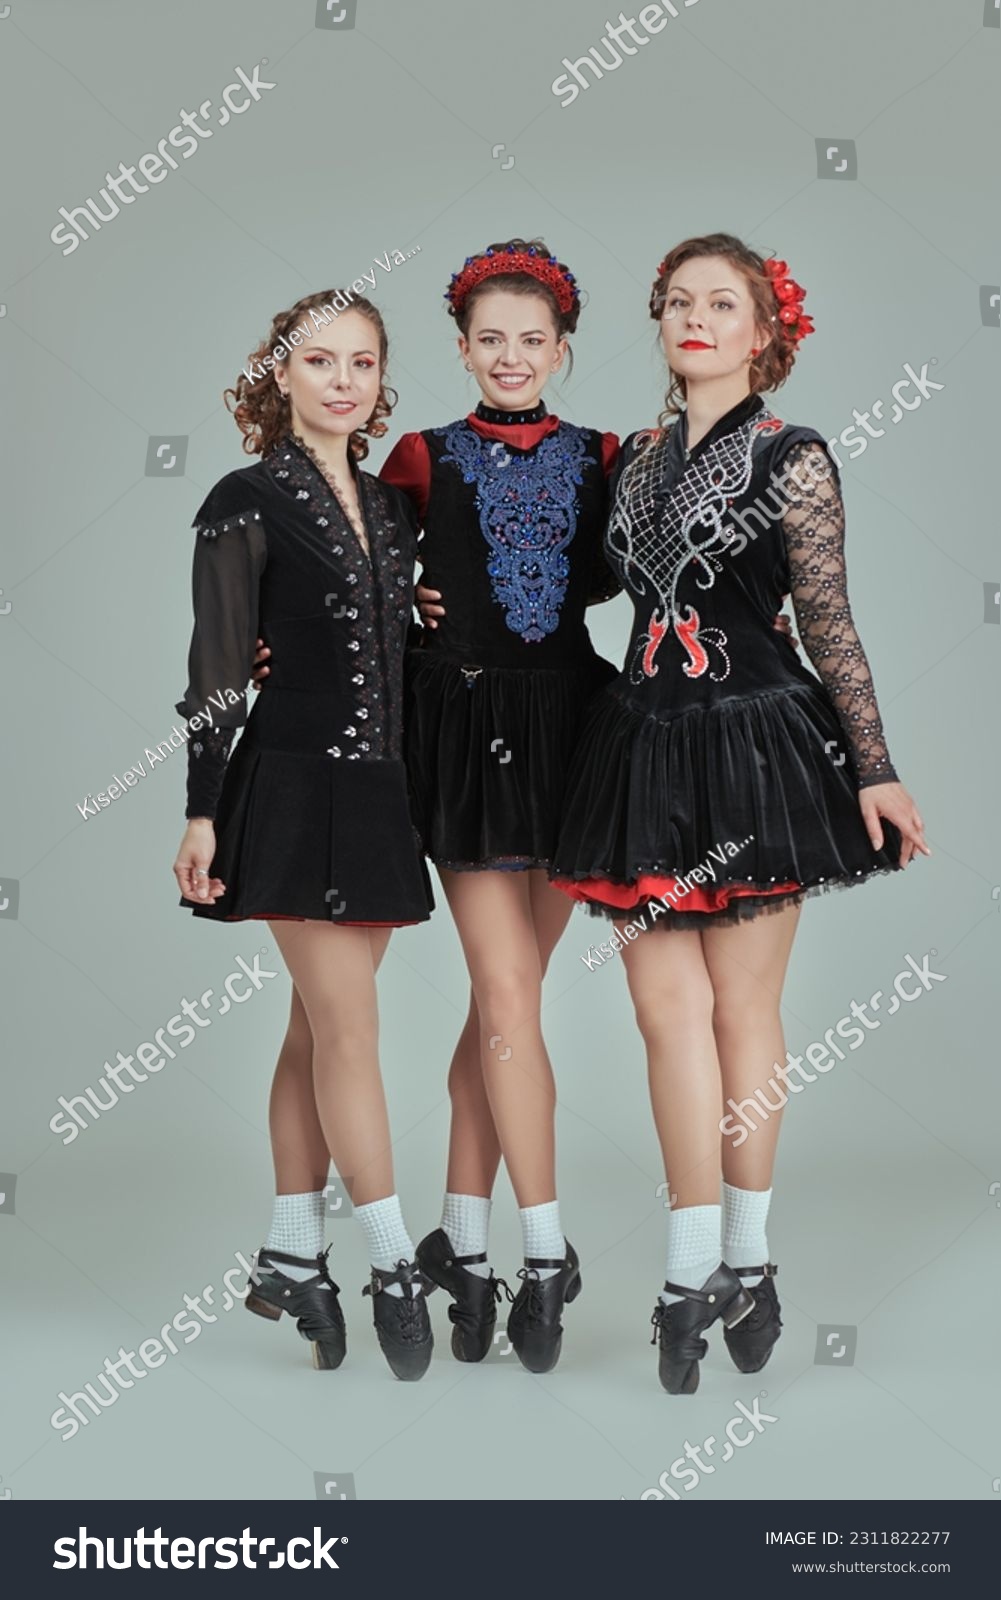 Professional women's Irish dance ensemble in concert costumes and Ghillies Hard Shoes pose together in a row. Full-length studio portrait on a grey background. #2311822277